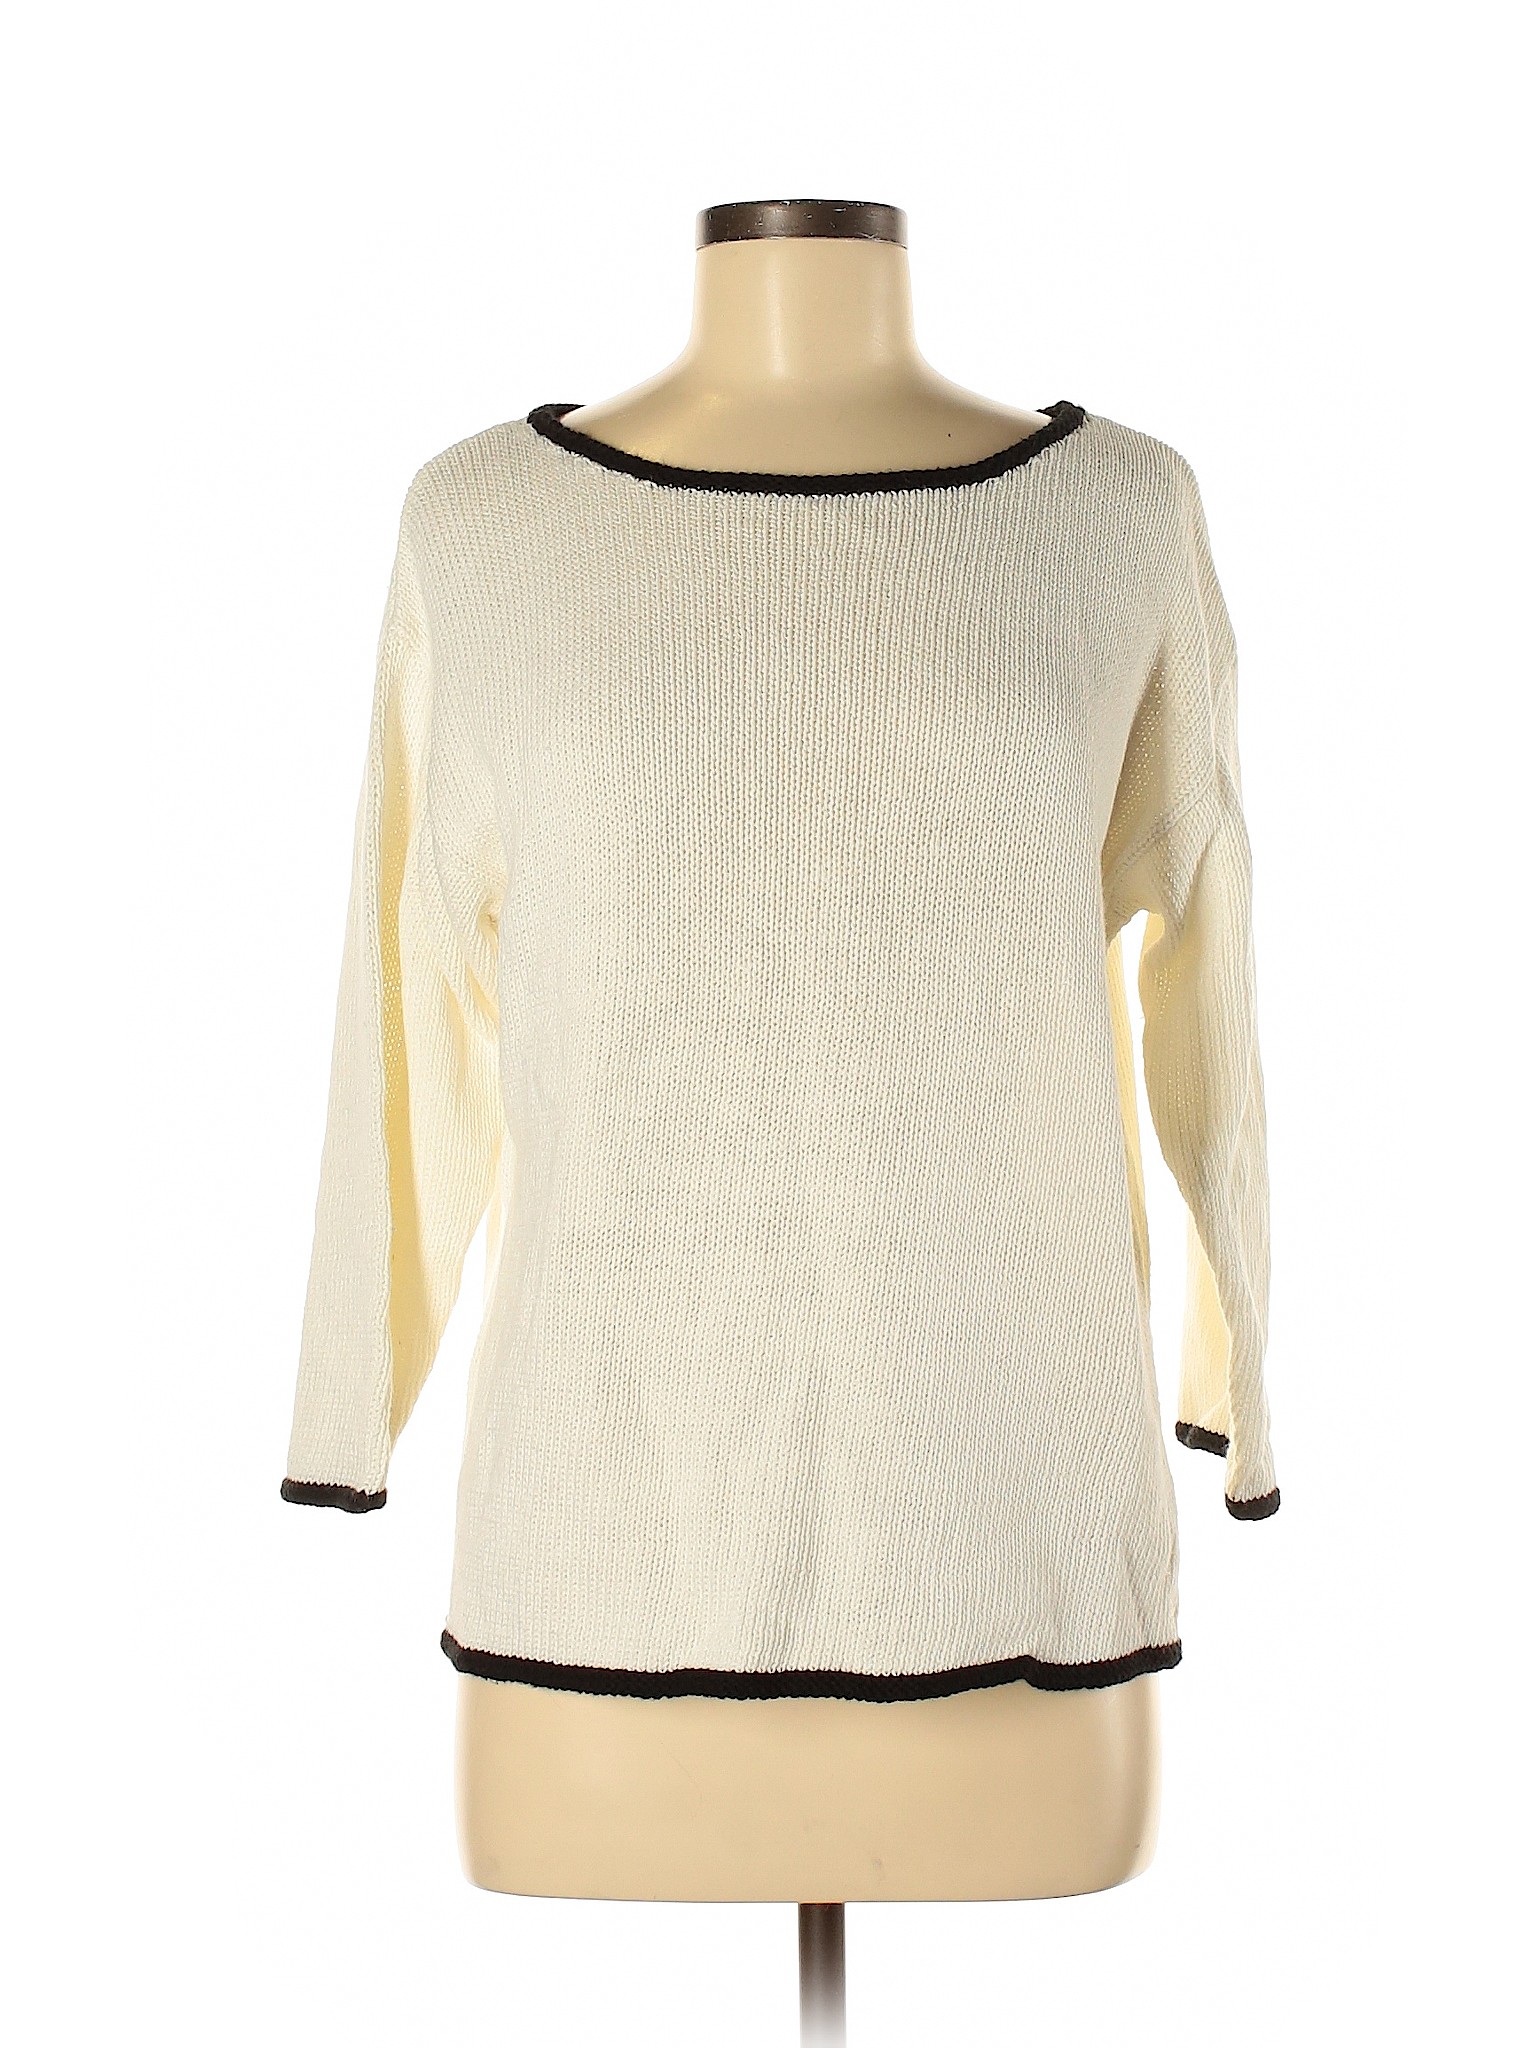 Jones New York Sport Solid Ivory White Pullover Sweater Size M - 84% ...